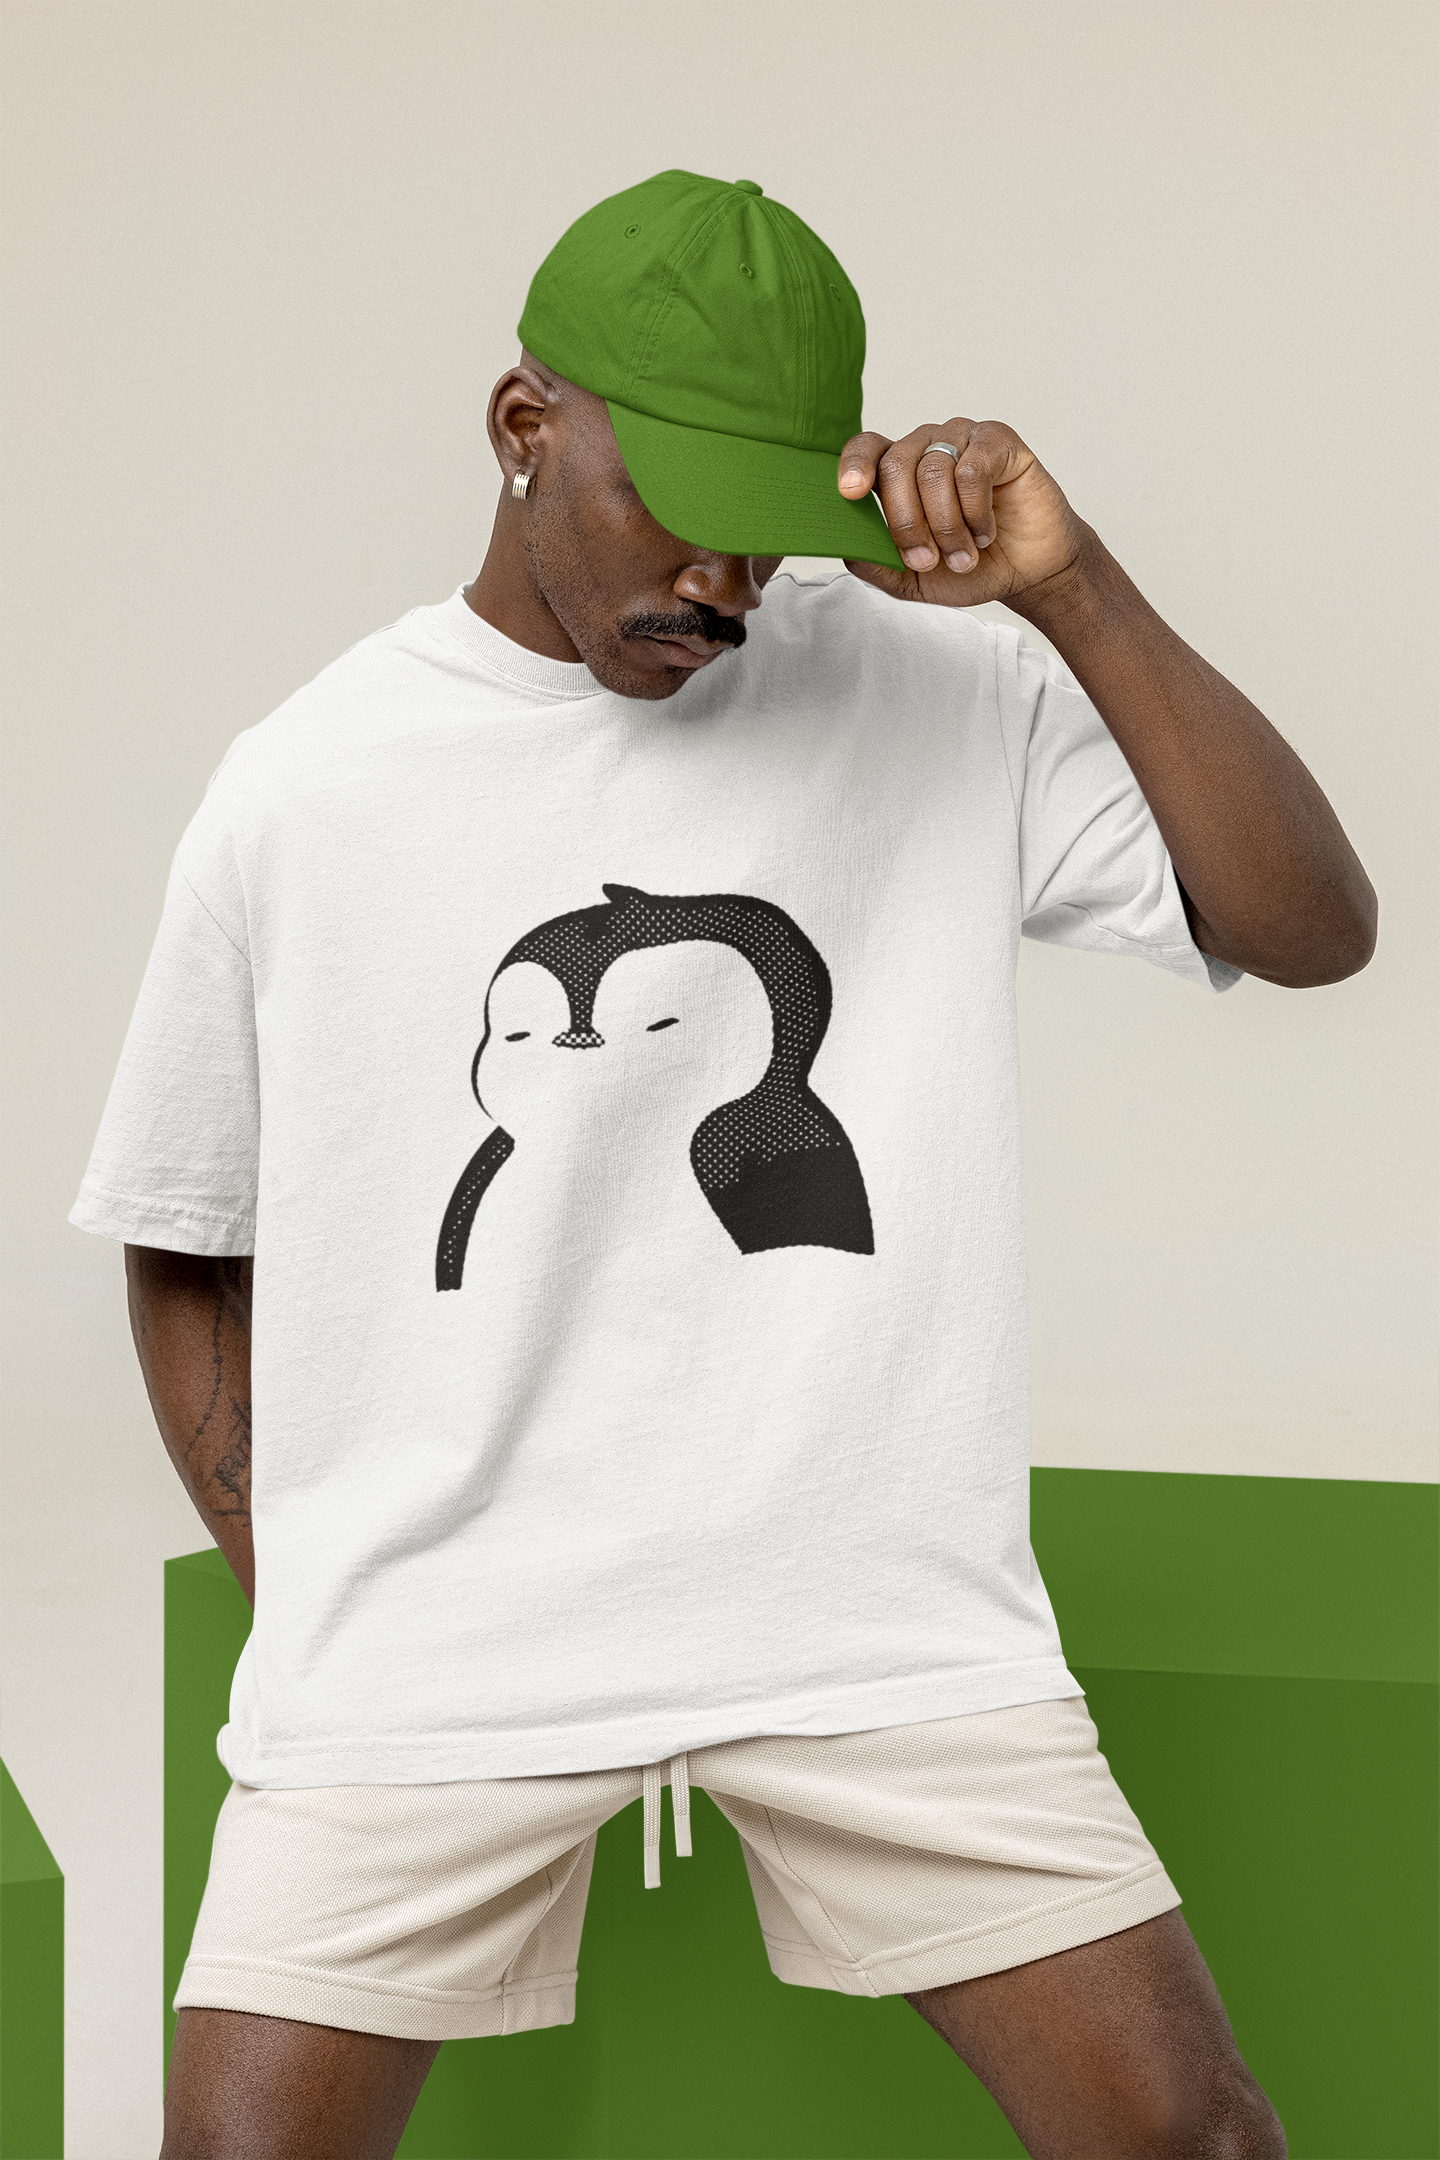 Oversized tee with distinctive Pudgy Penguin motif in white.